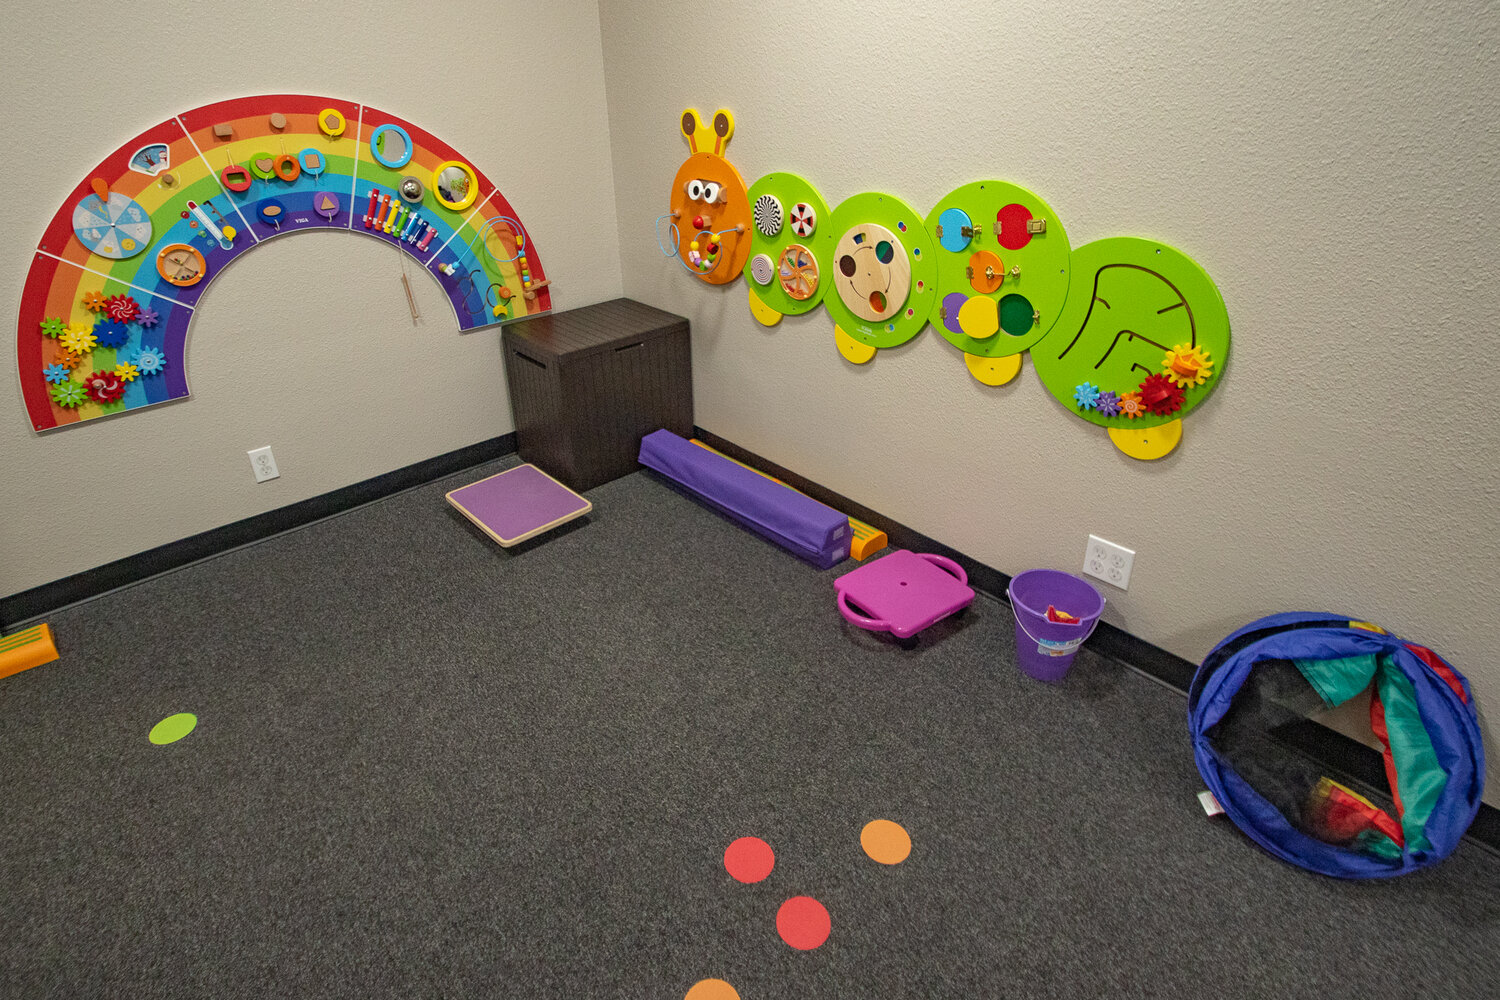 Children's toys are seen mounted on the walls of a therapy room on Friday, Sept. 8 at the Cornerstone Center for Development which offers speech, occupational and physical therapies to parents with children who have autism or other disabilities